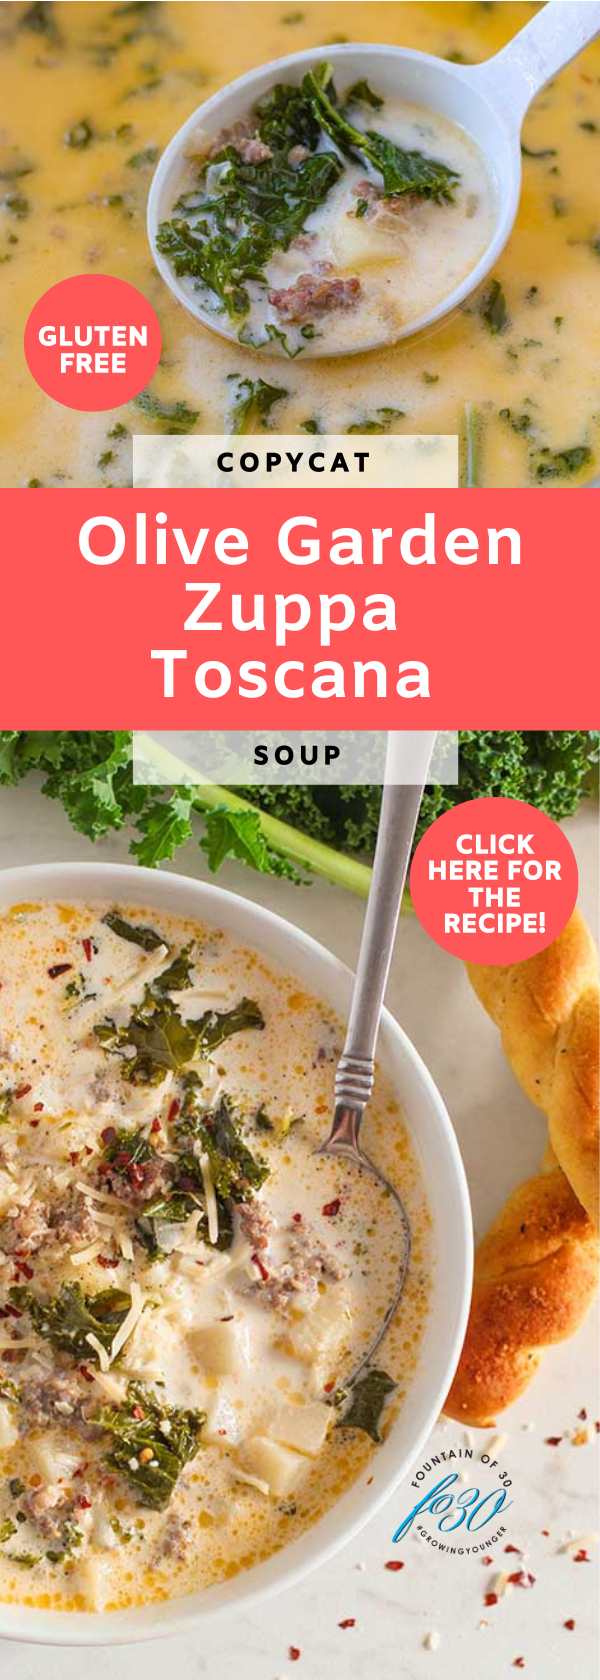 Copycat Olive Garden Zuppa Toscana soup is easy to make with spicy Italian sausage, fresh kale and russet potatoes in a creamy broth fountainof30